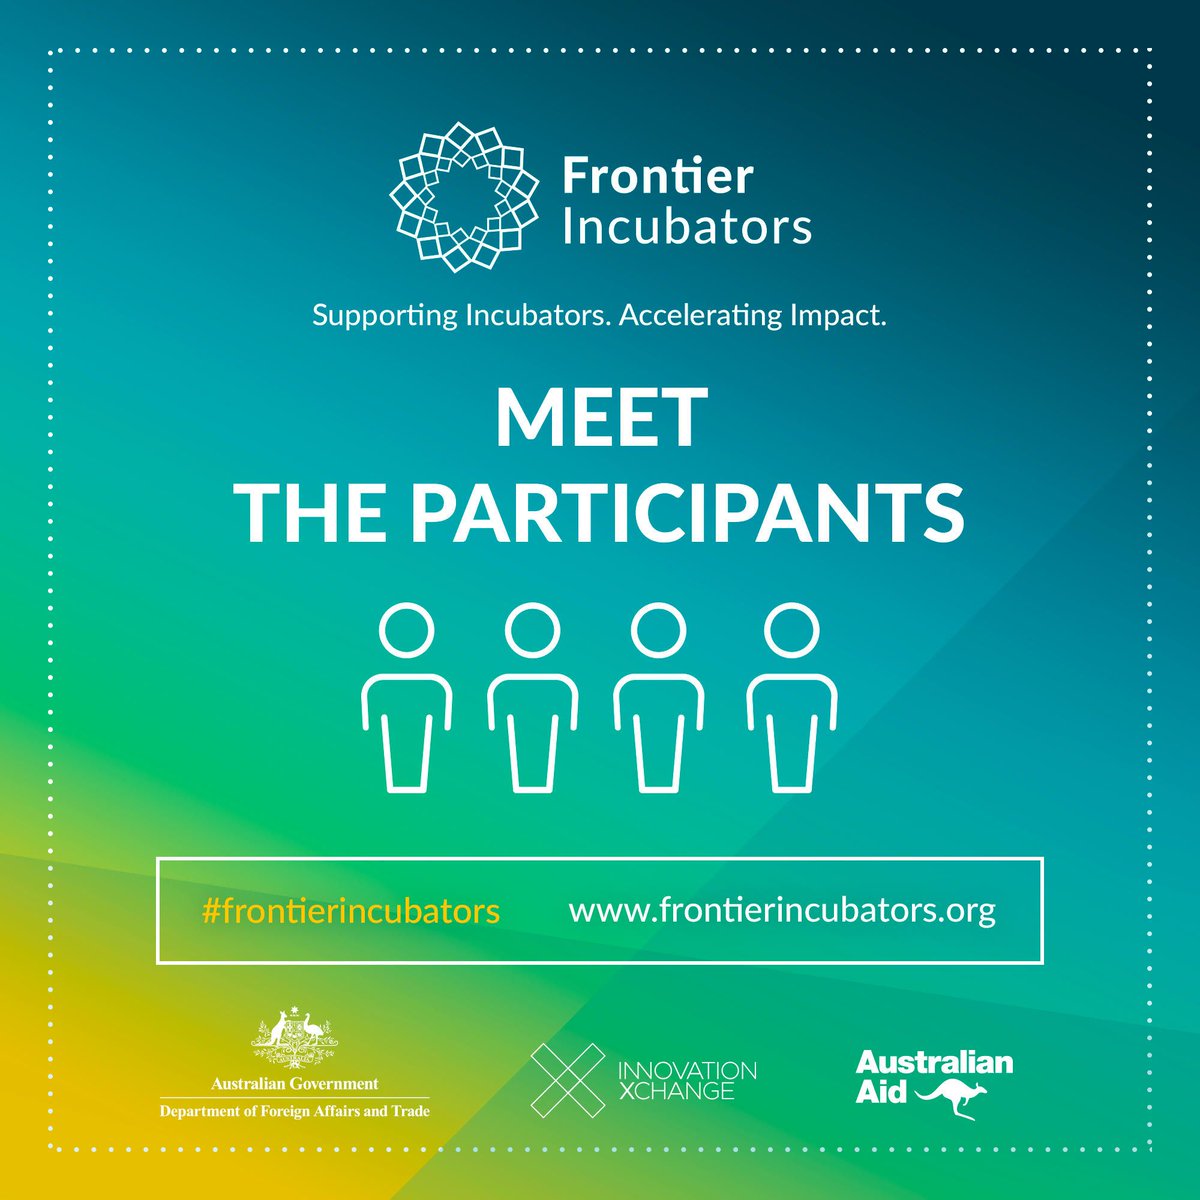 We are very honored to be a part of the Frontier Incubators capacity building program. Frontier Incubators is an initiative of the Australian Government Department of Foreign Affairs and Trade (@dfat_iXc).  
#FrontierIncubators  
buff.ly/2Fe9563